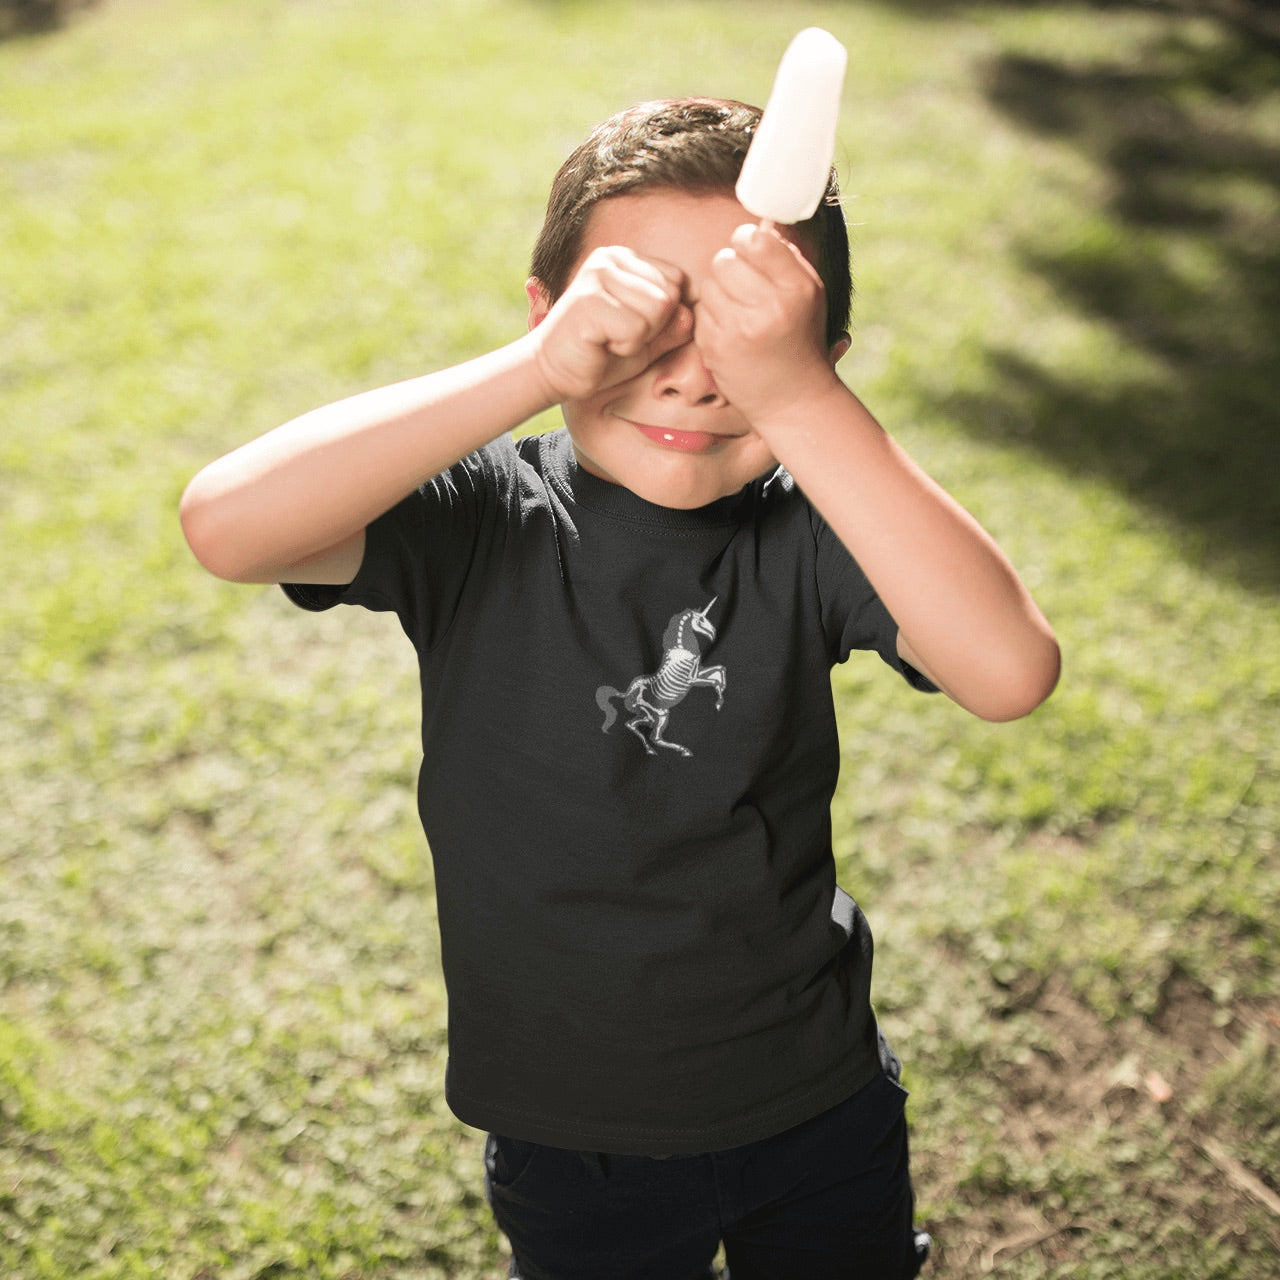 Brunette boy holds his fists in front of his eyes while also holding a white popsicle while standing on a grass lawn wearing a unicorn skeleton youth t-shirt in black